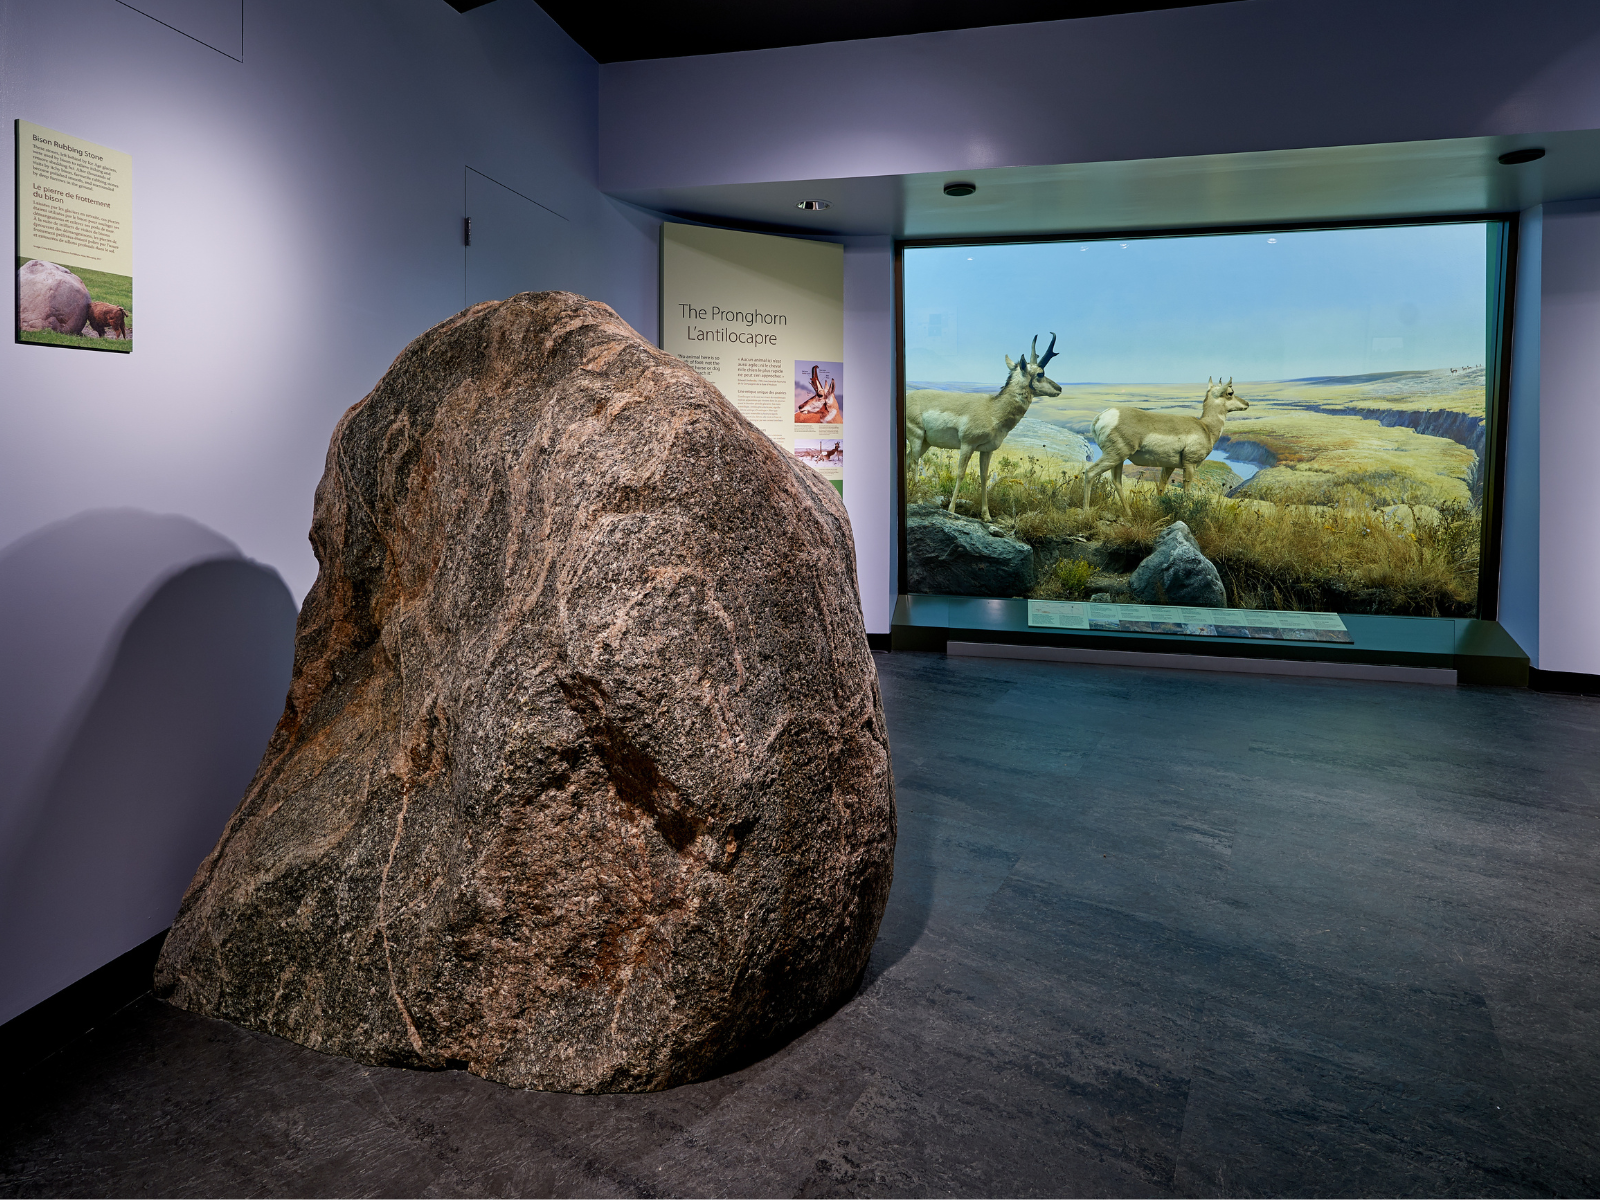 In the foreground a large mottled grey-brown boulder in the Museum Galleries. In the background is a diorama with two Pronghorns walking across.